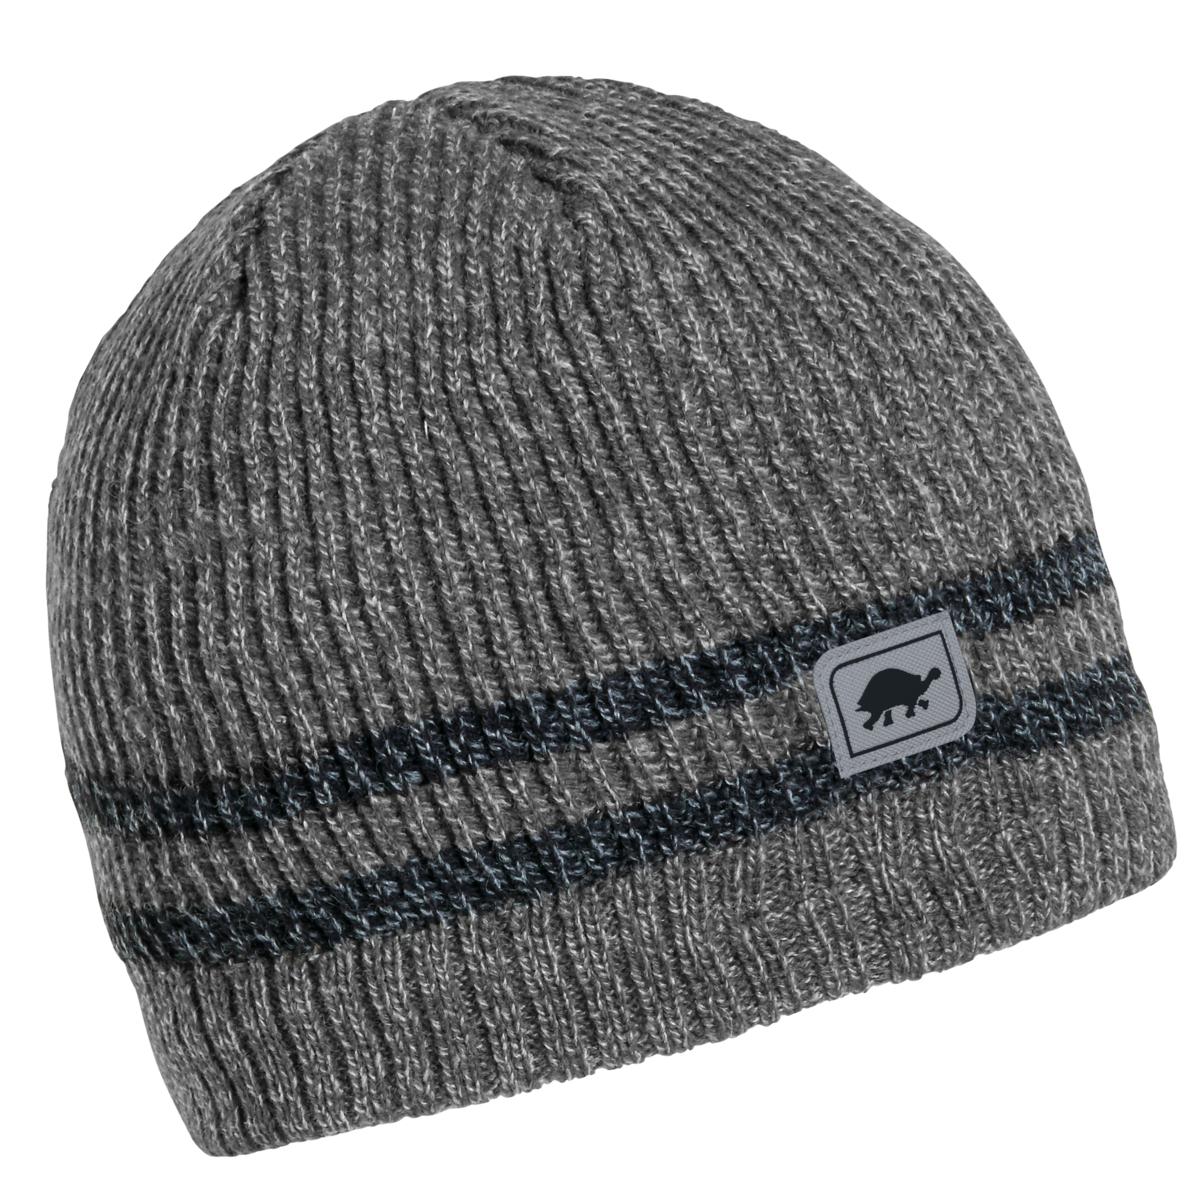 Turtle Fur Wool Blend Relaxed Fit Beanie | Mr Happy Charcoal